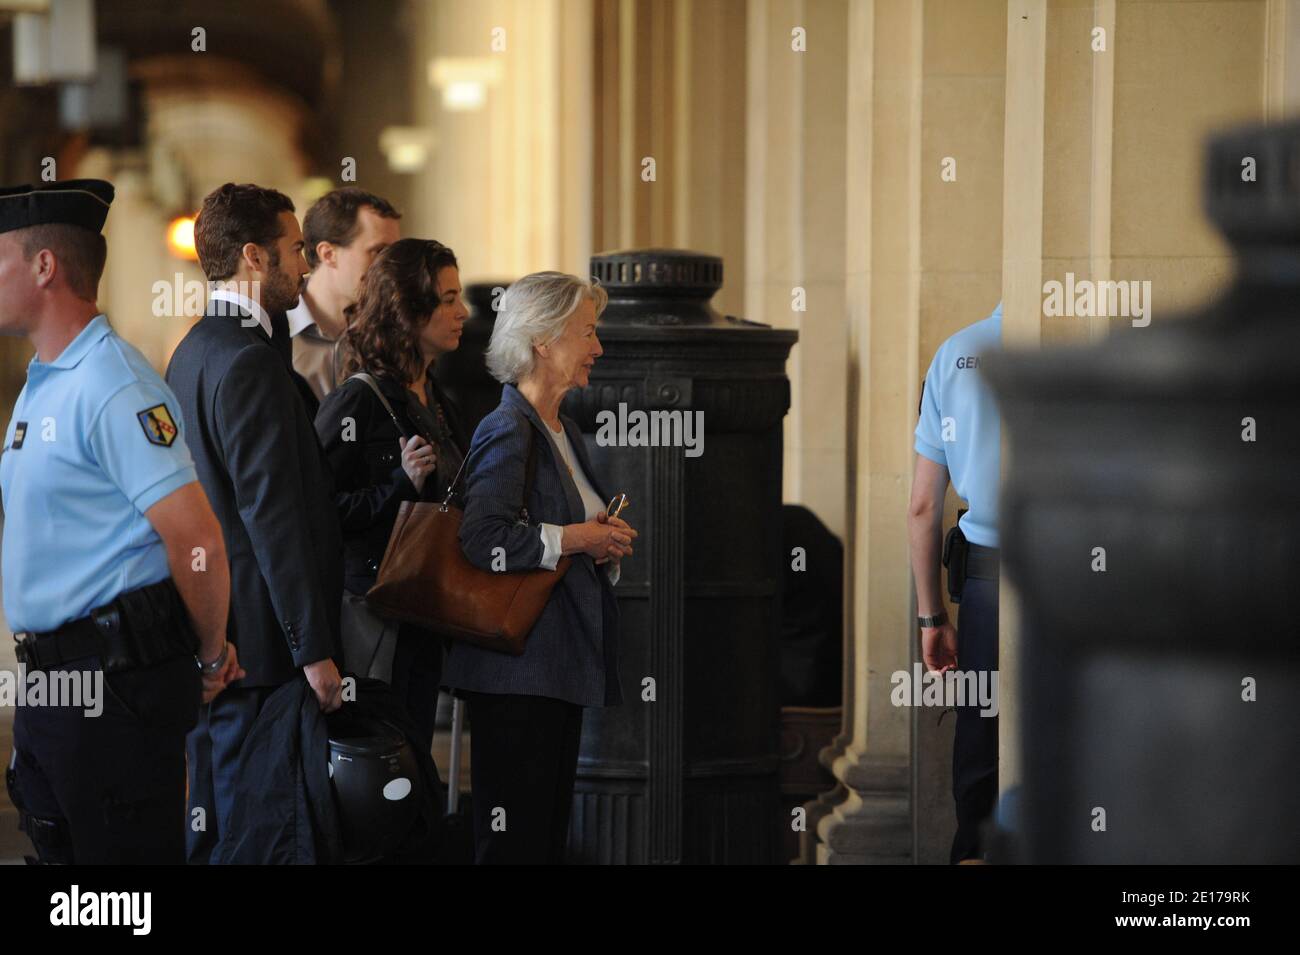 The widow of Claude Erignac, Dominique Erignac arrives with her children Charles-Antoine Erignac and Marie-Christophine Erignac at Paris court hall in Paris, France on May 30, 2011 during Yvan Colonna's appeal trial for the murder in 1998 of Claude Erignac, France's top state official on the Mediterranean island of Corsica. Photo by Mousse/ABACAPRESS.COM Stock Photo